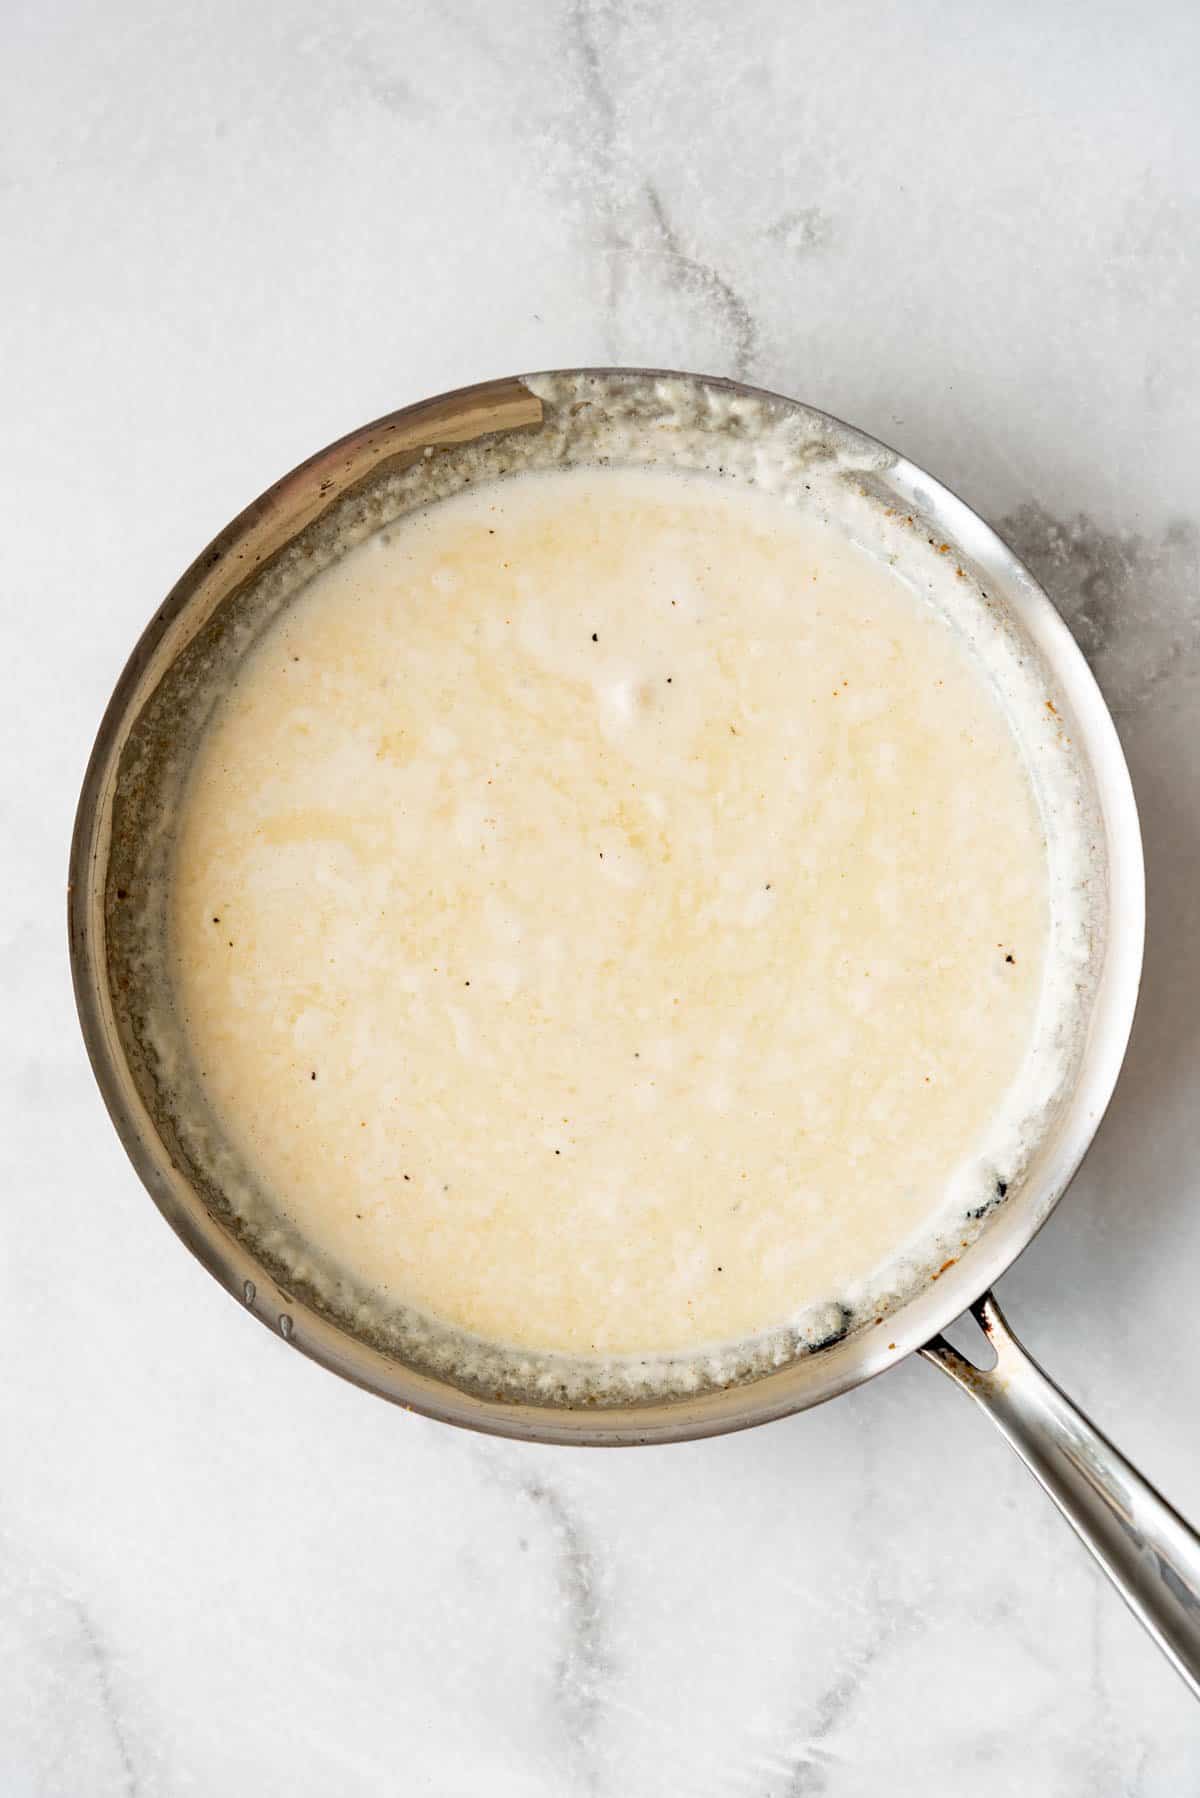 Simmered cream, butter, garlic, and spices in a pan for homemade alfredo sauce.